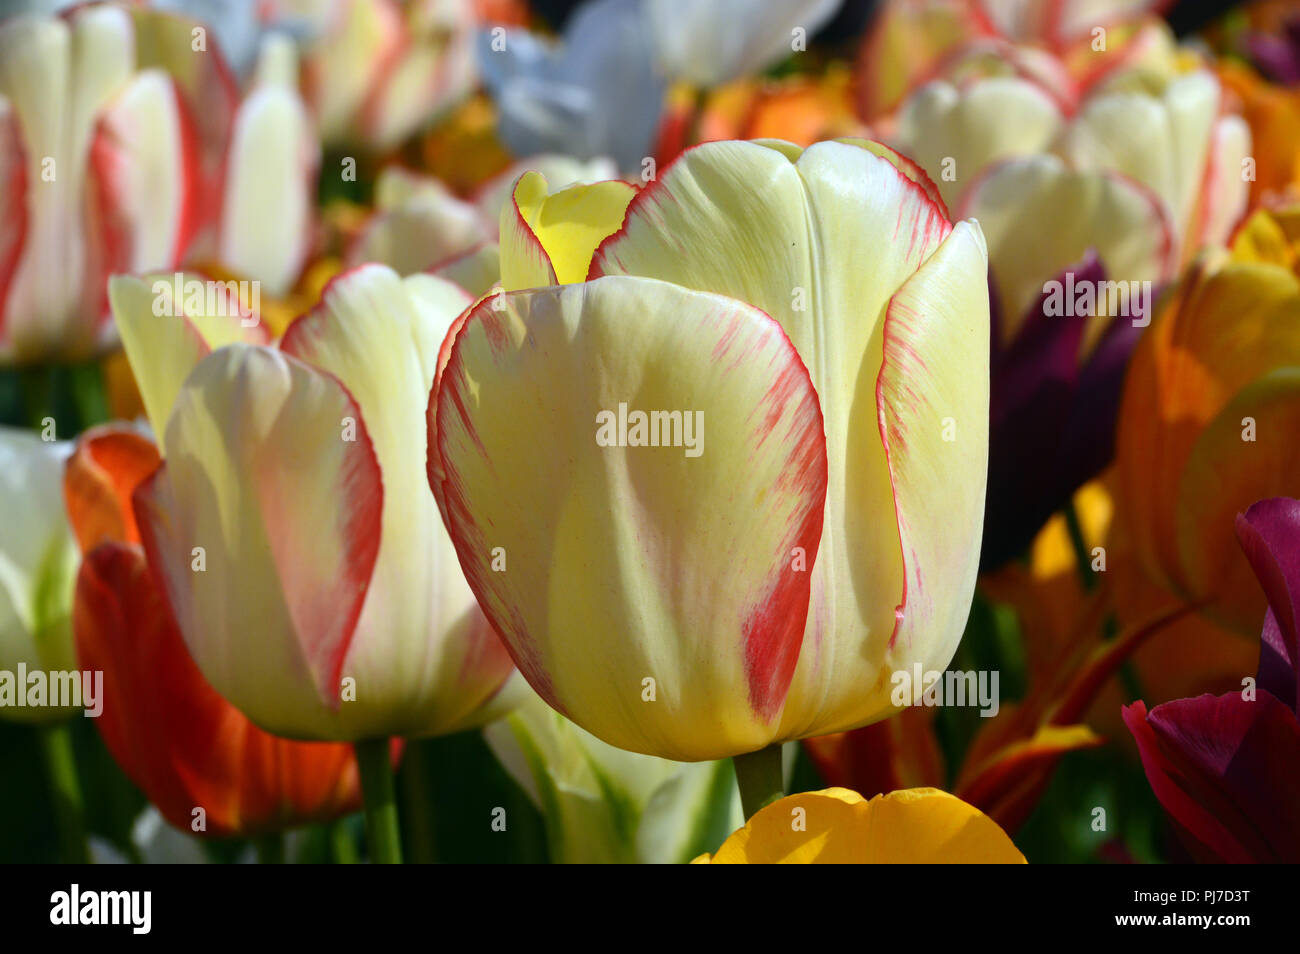 Tulip Beauty Of Spring Is A Darwin Hybrid Tulip Flower Grown At Harlow Carr Harrogate Yorkshire England Uk Stock Photo Alamy